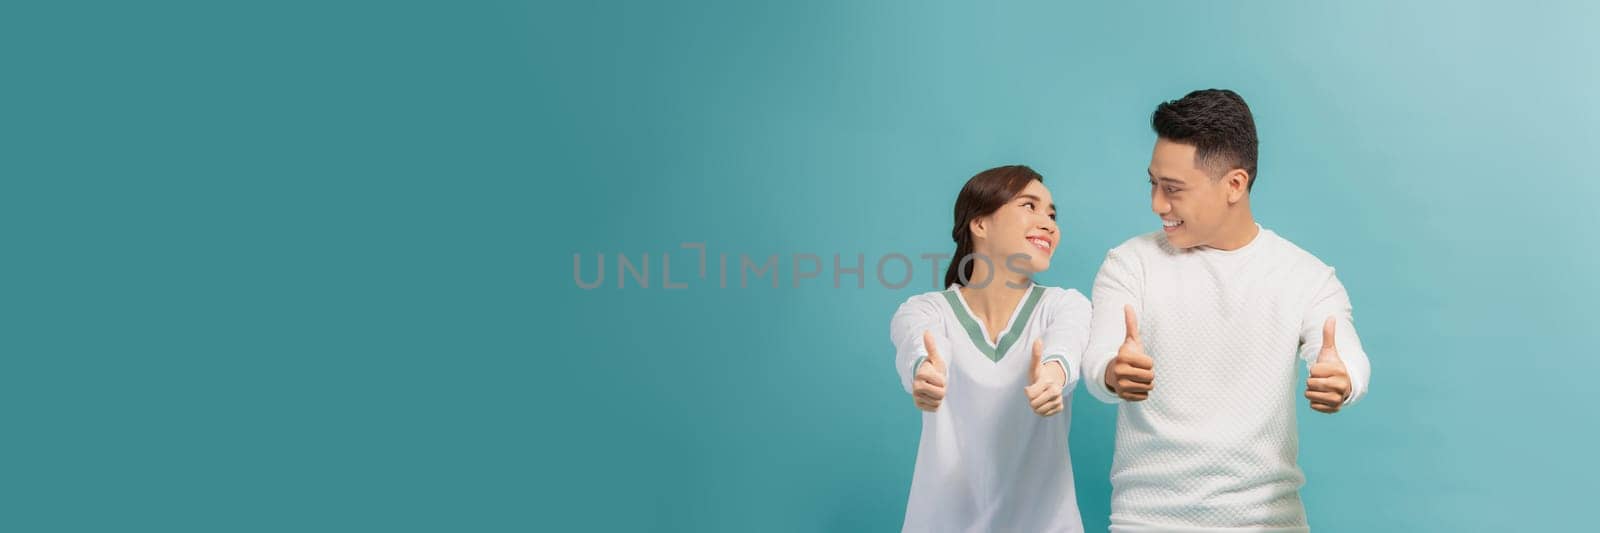 A romantic two spouses promoters show thumb up sign decide ads choose promo advice sales by makidotvn